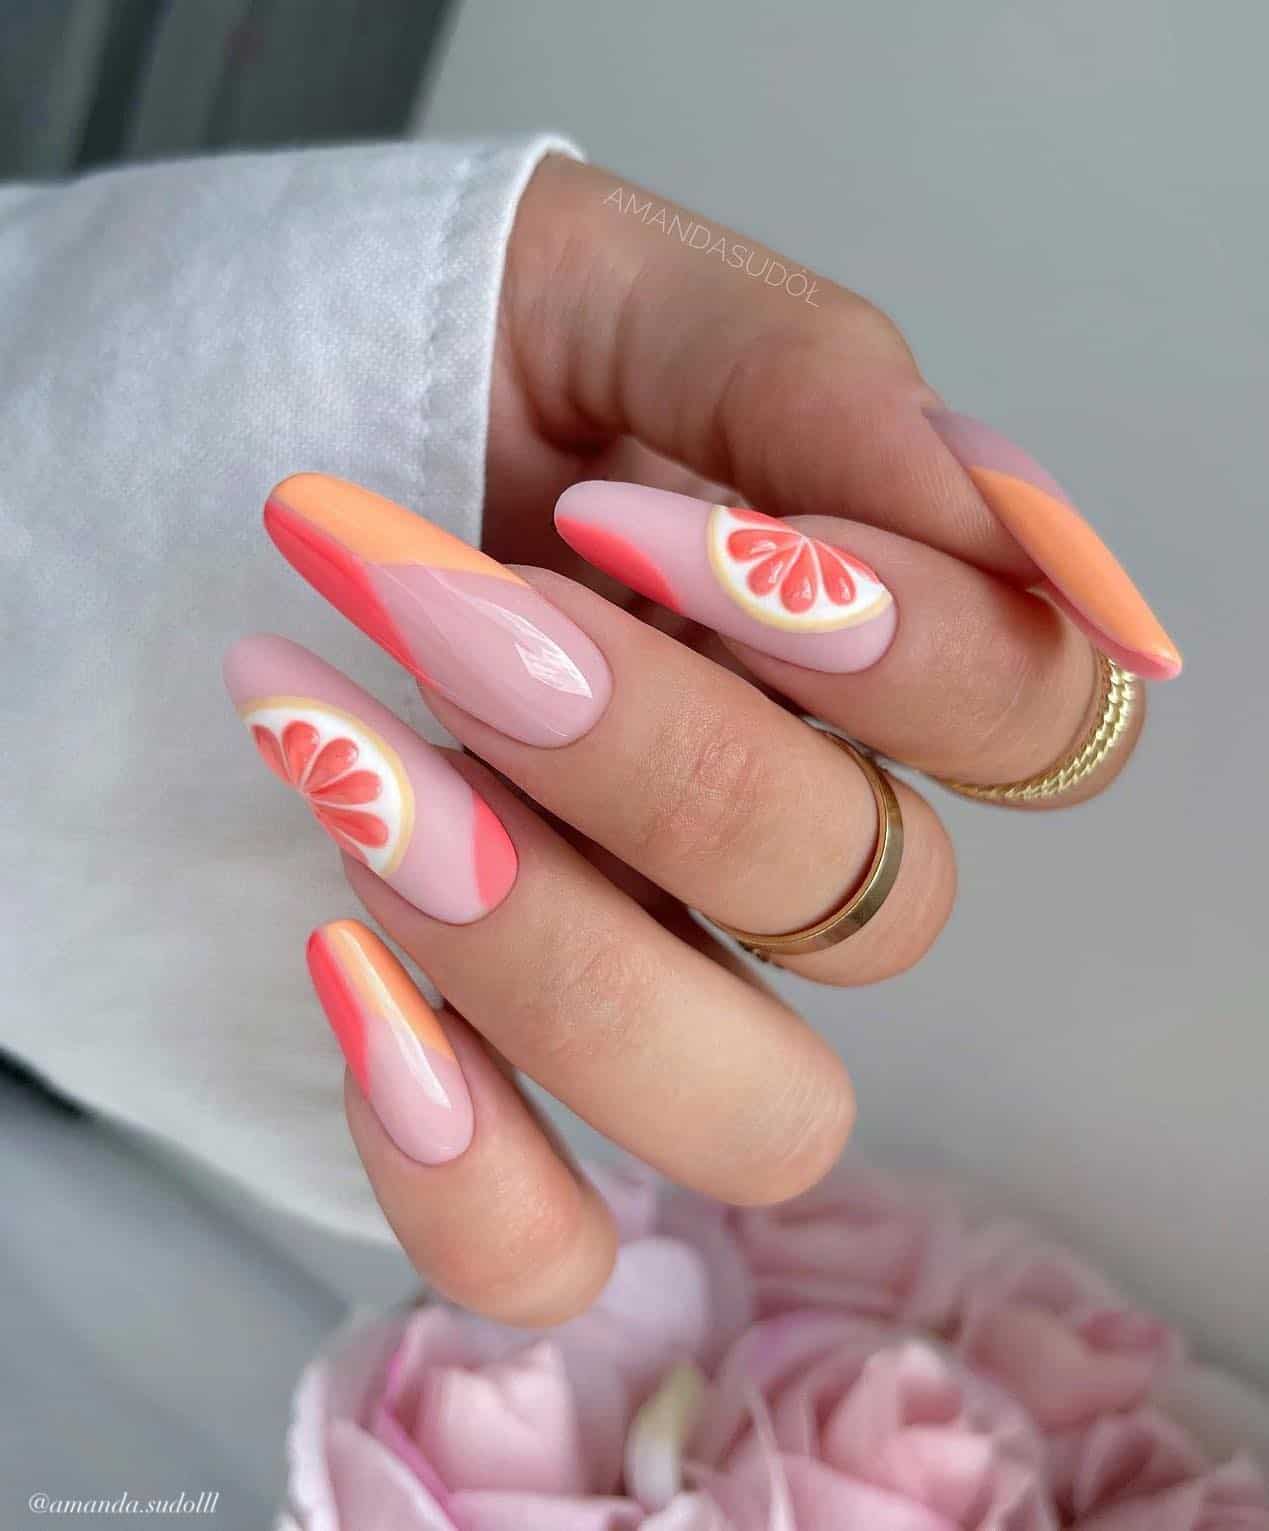 A hand with long almond nails painted a nude pink with peach and coral peach French tips and grapefruit nails art